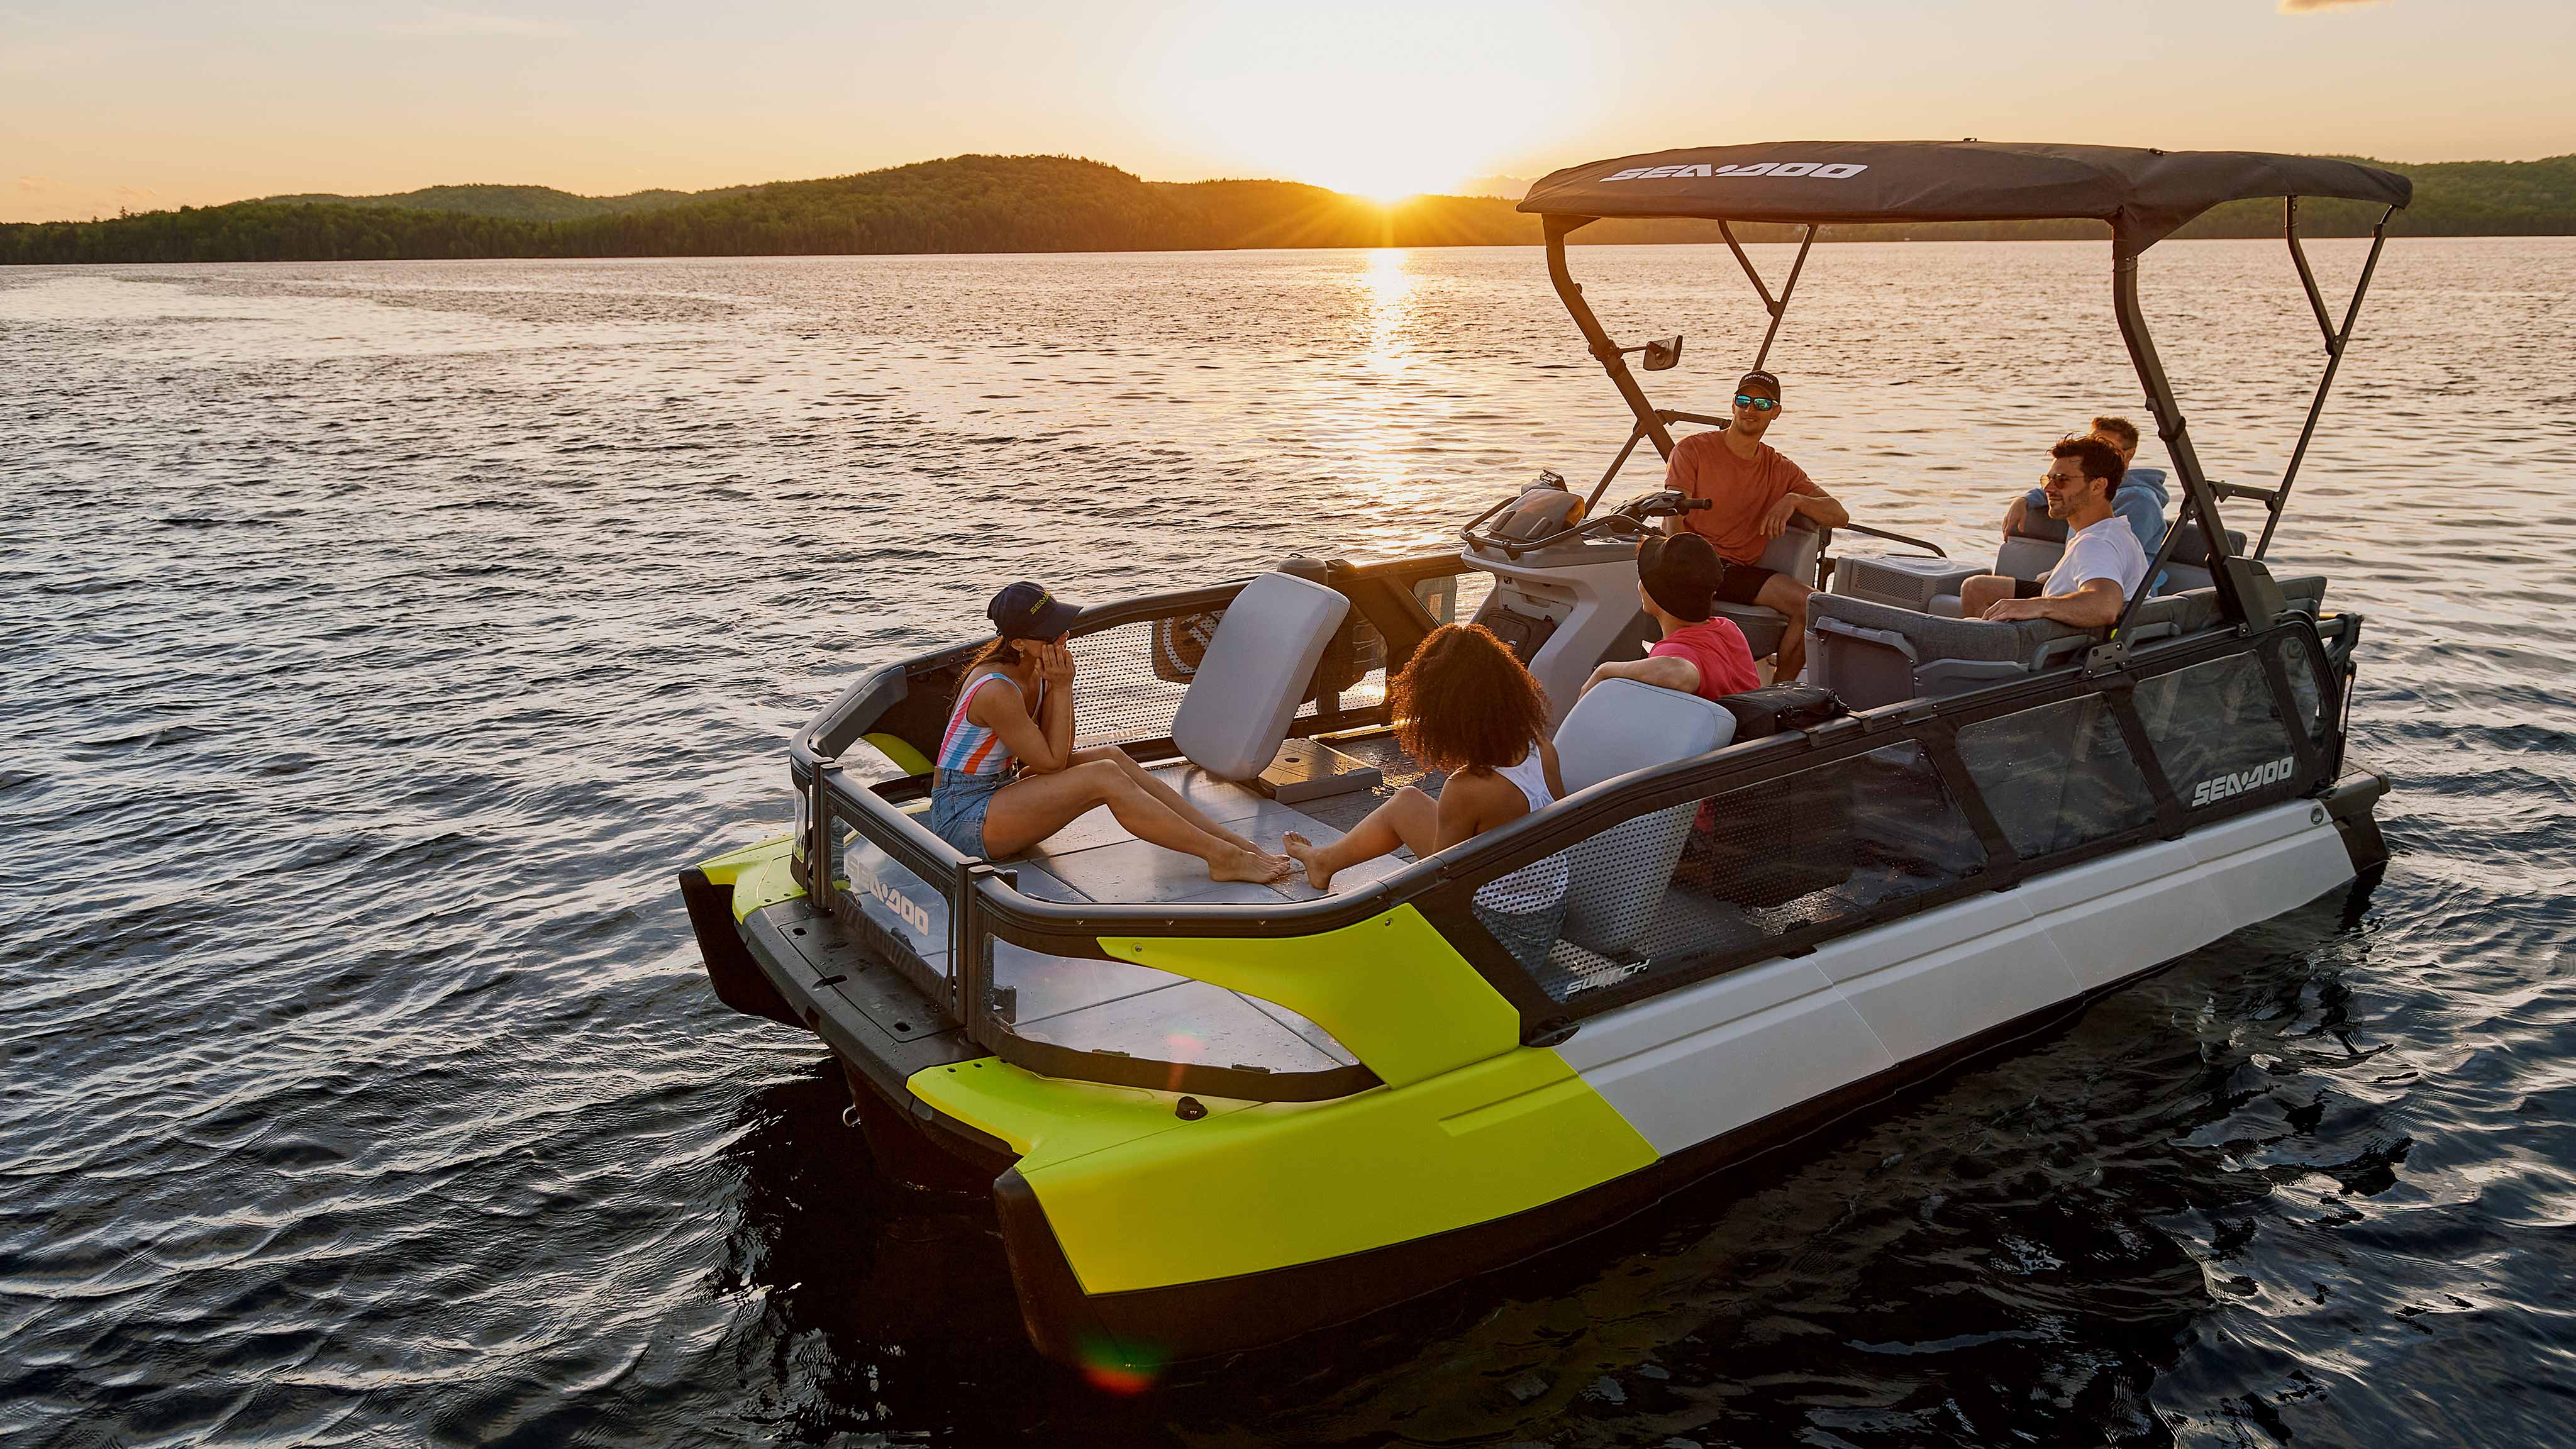 2022 Sea-Doo Switch Sport : Pontoon Boat for Water Sports